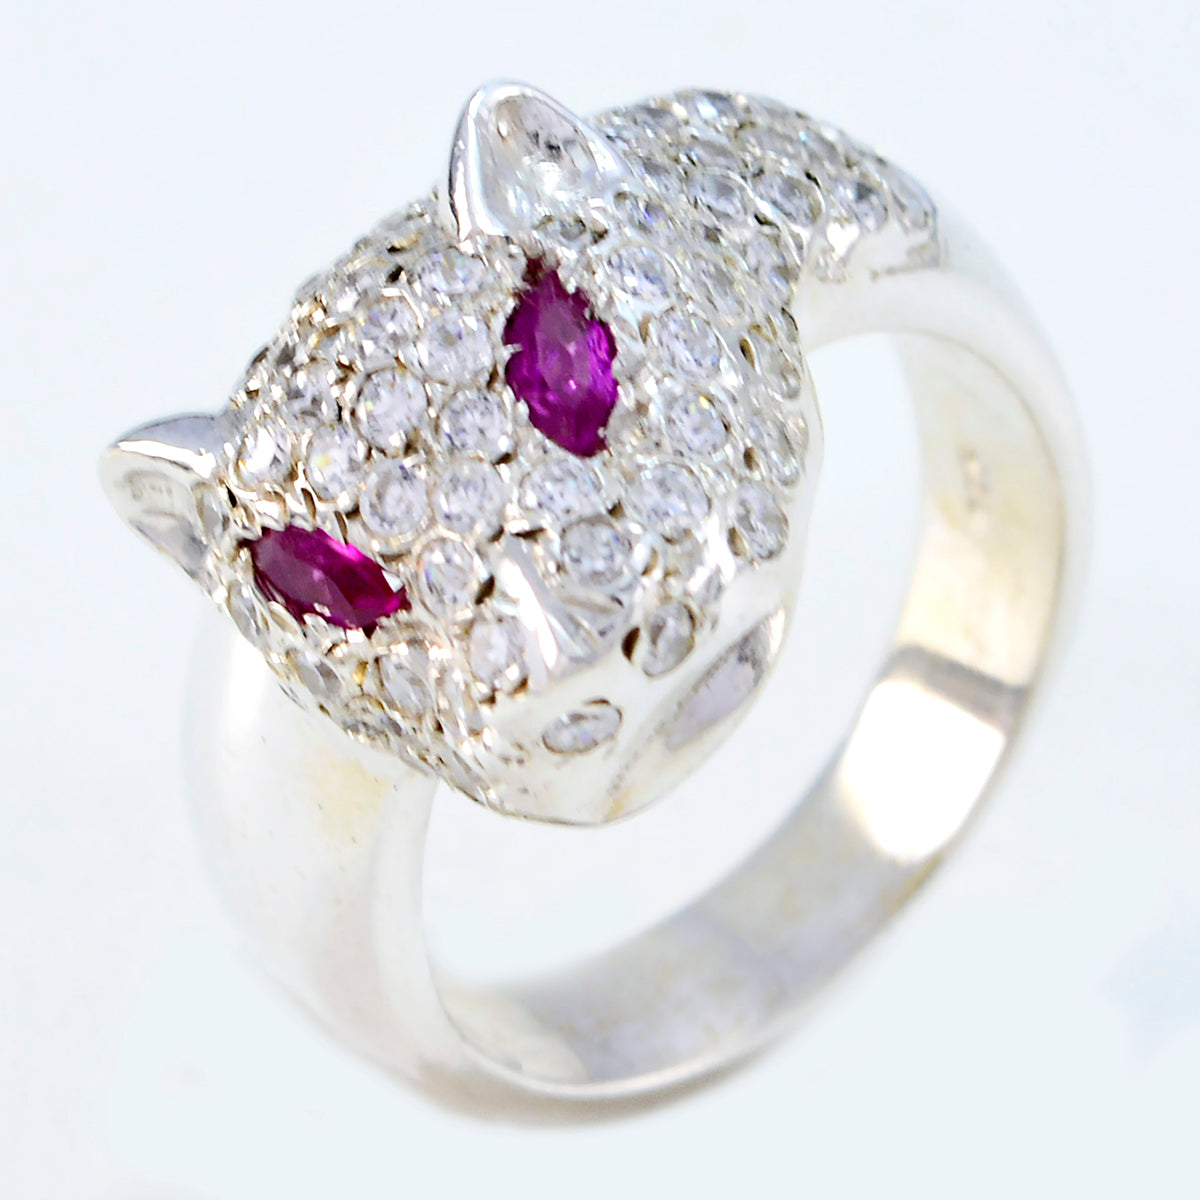 Sublime Gemstones Indianruby 925 Sterling Silver Ring Jewelry Set